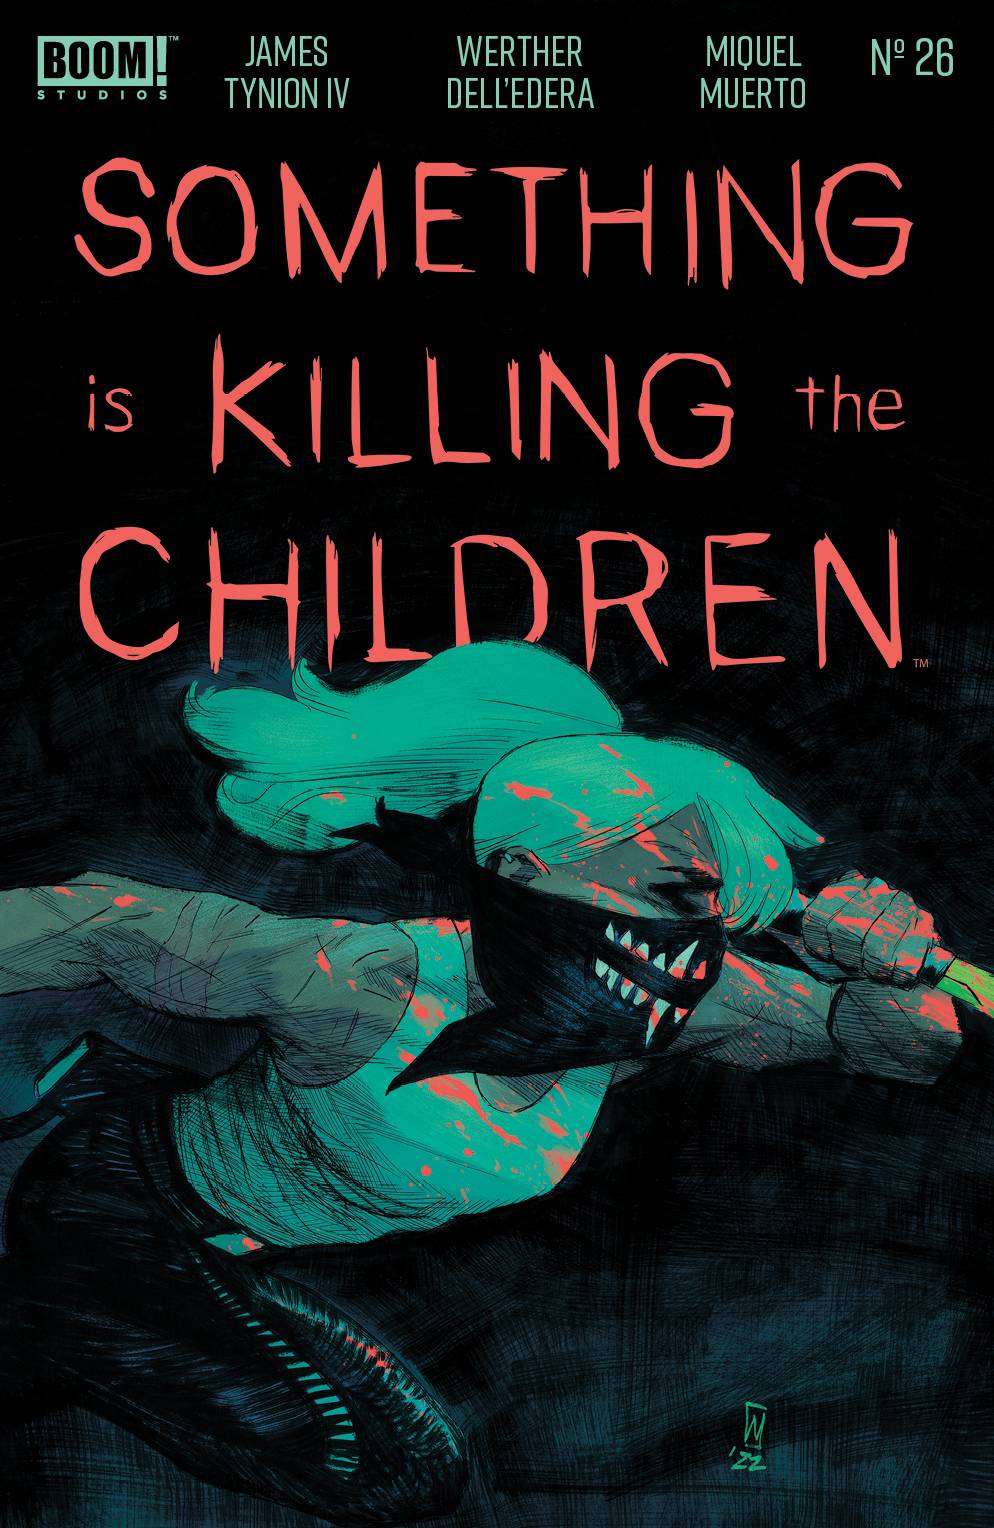 The One Stop Shop Comics & Games Something Is Killing The Children #26 Cvr A Dell Edera (11/16/2022) BOOM! STUDIOS